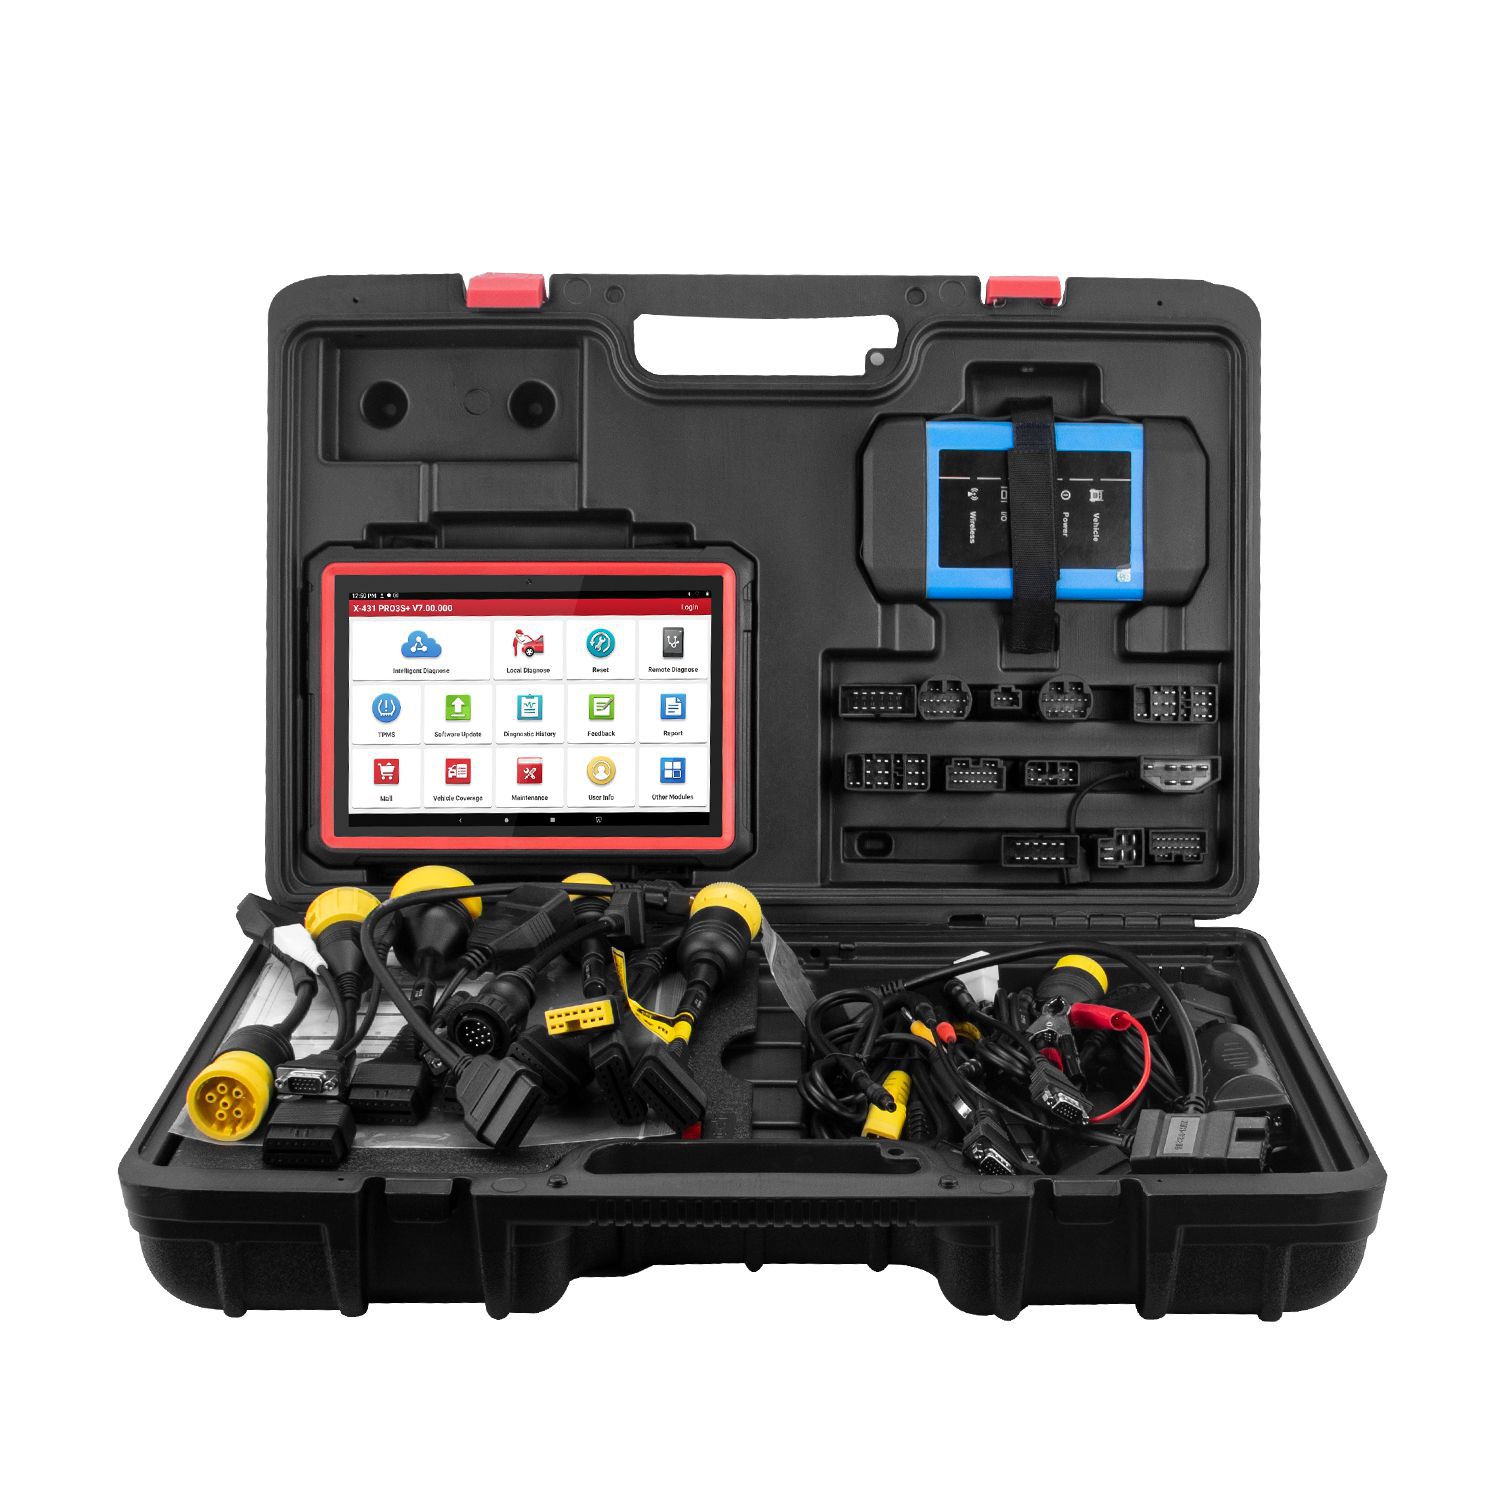 LAUCH X431 PRO3S+ V2.0 HDIII 12V Car/24V Truck/Heavy Duty 2 in 1 Diagnostic Tool OBDII Code Reader Auto Scanner X-431 PRO3S HD3